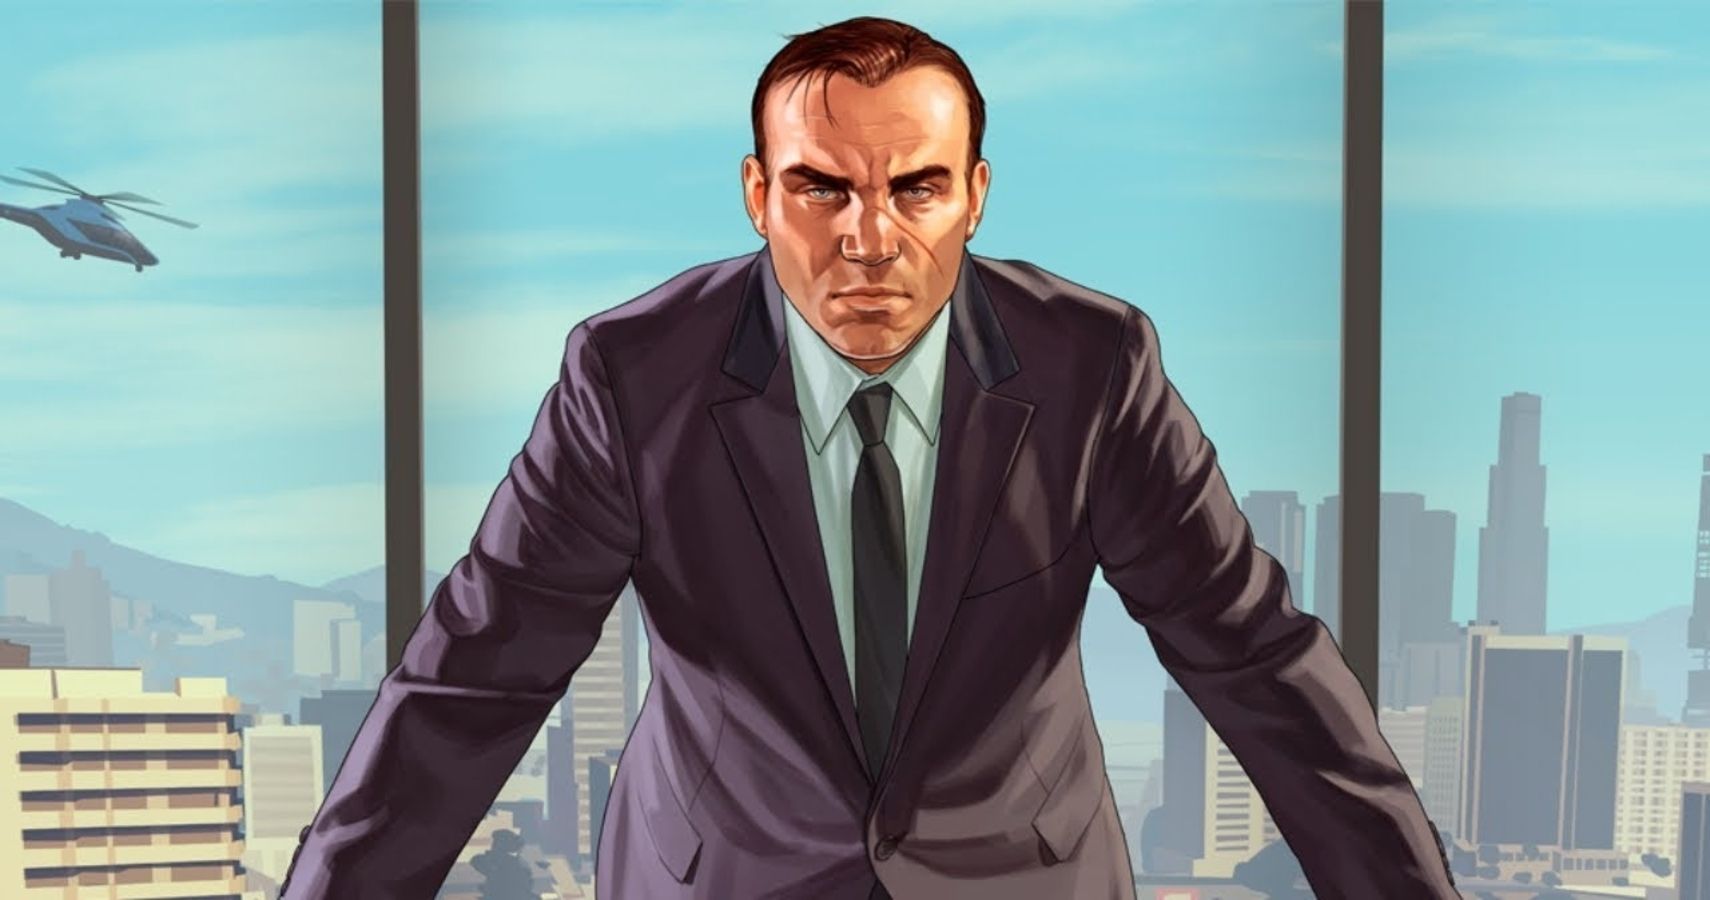 GTA VI Is In Development According To Former Rockstar Employee Resume (And Might Be A PS5 Exclusive)